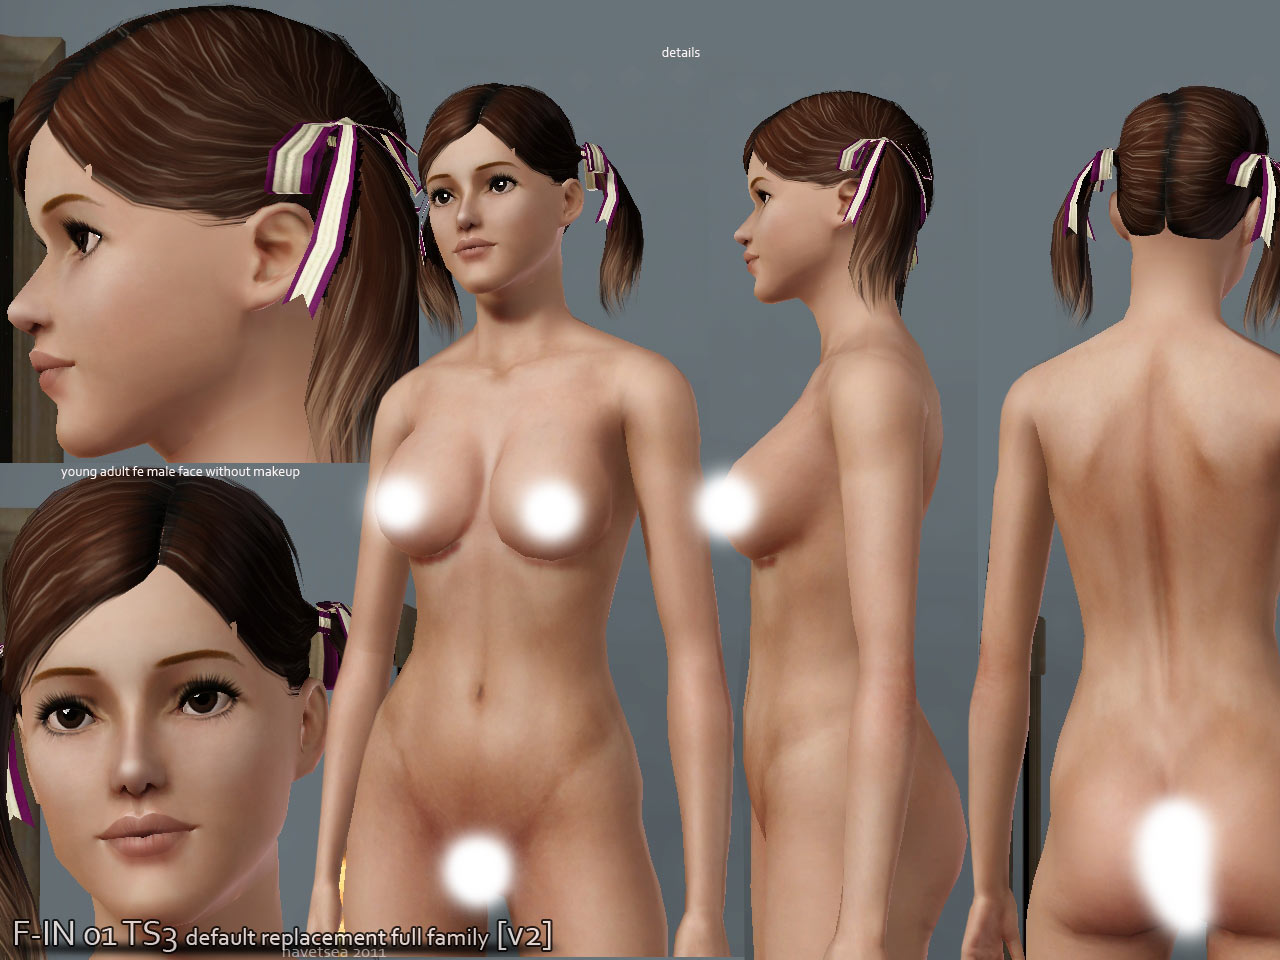 Sims 3 female nude patch adult video